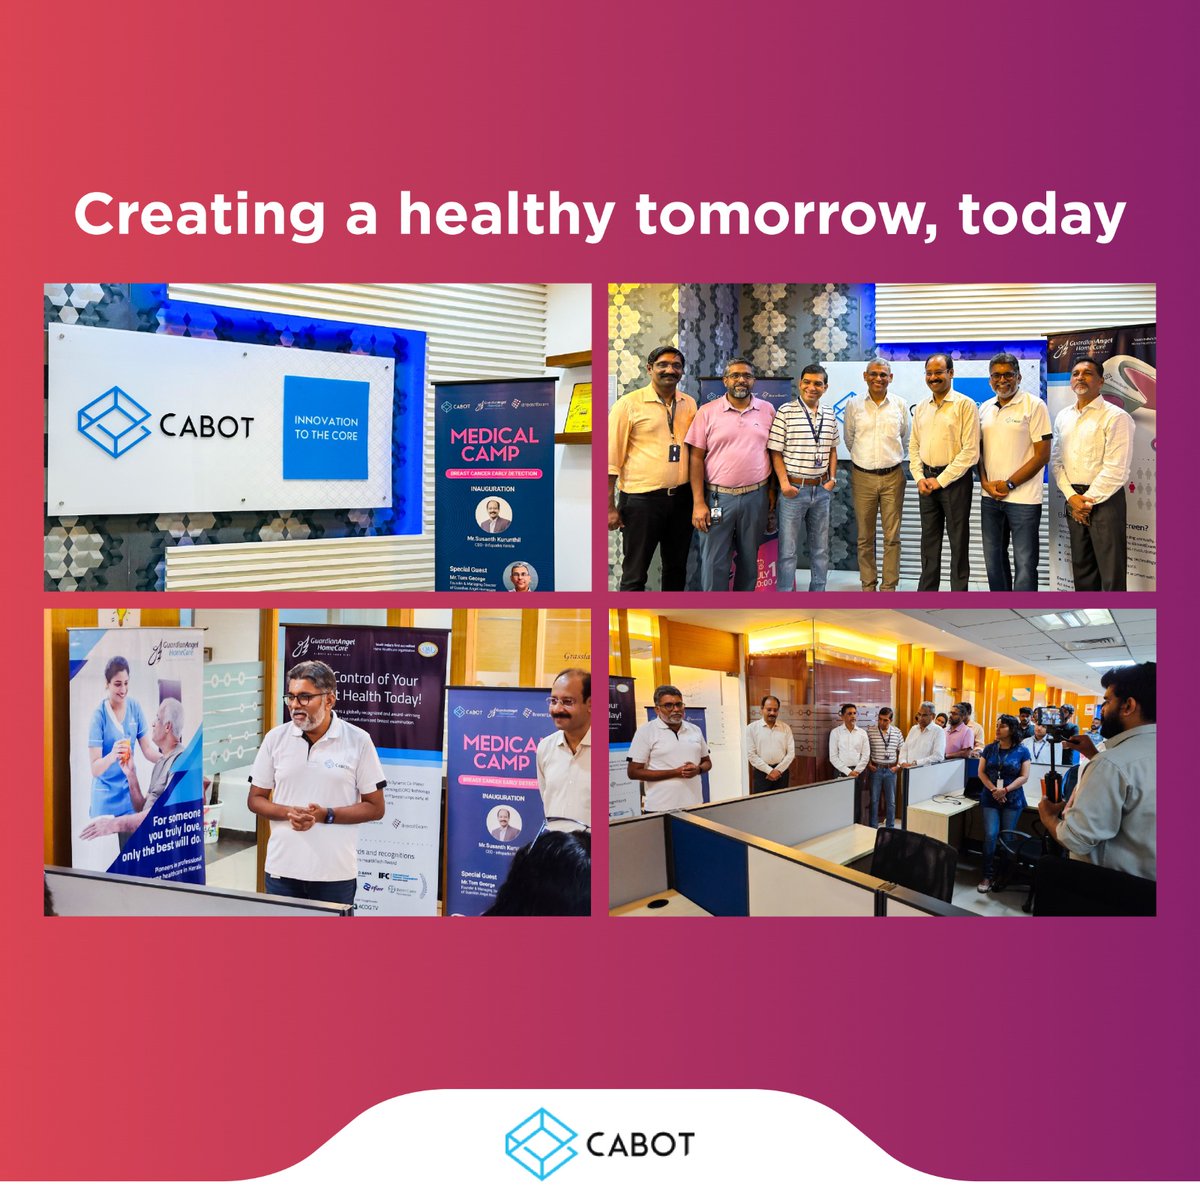 Infopark CEO, Shri Susanth Kurunthil inaugurated a #medicalcamp hosted by #CabotSolutions in association with Guardian Angel Homecare. This camp held at Cabot's office in Infopark Kochi took a significant step towards raising #awareness.

#Infopark #InfoparkKochi #KeralaITParks